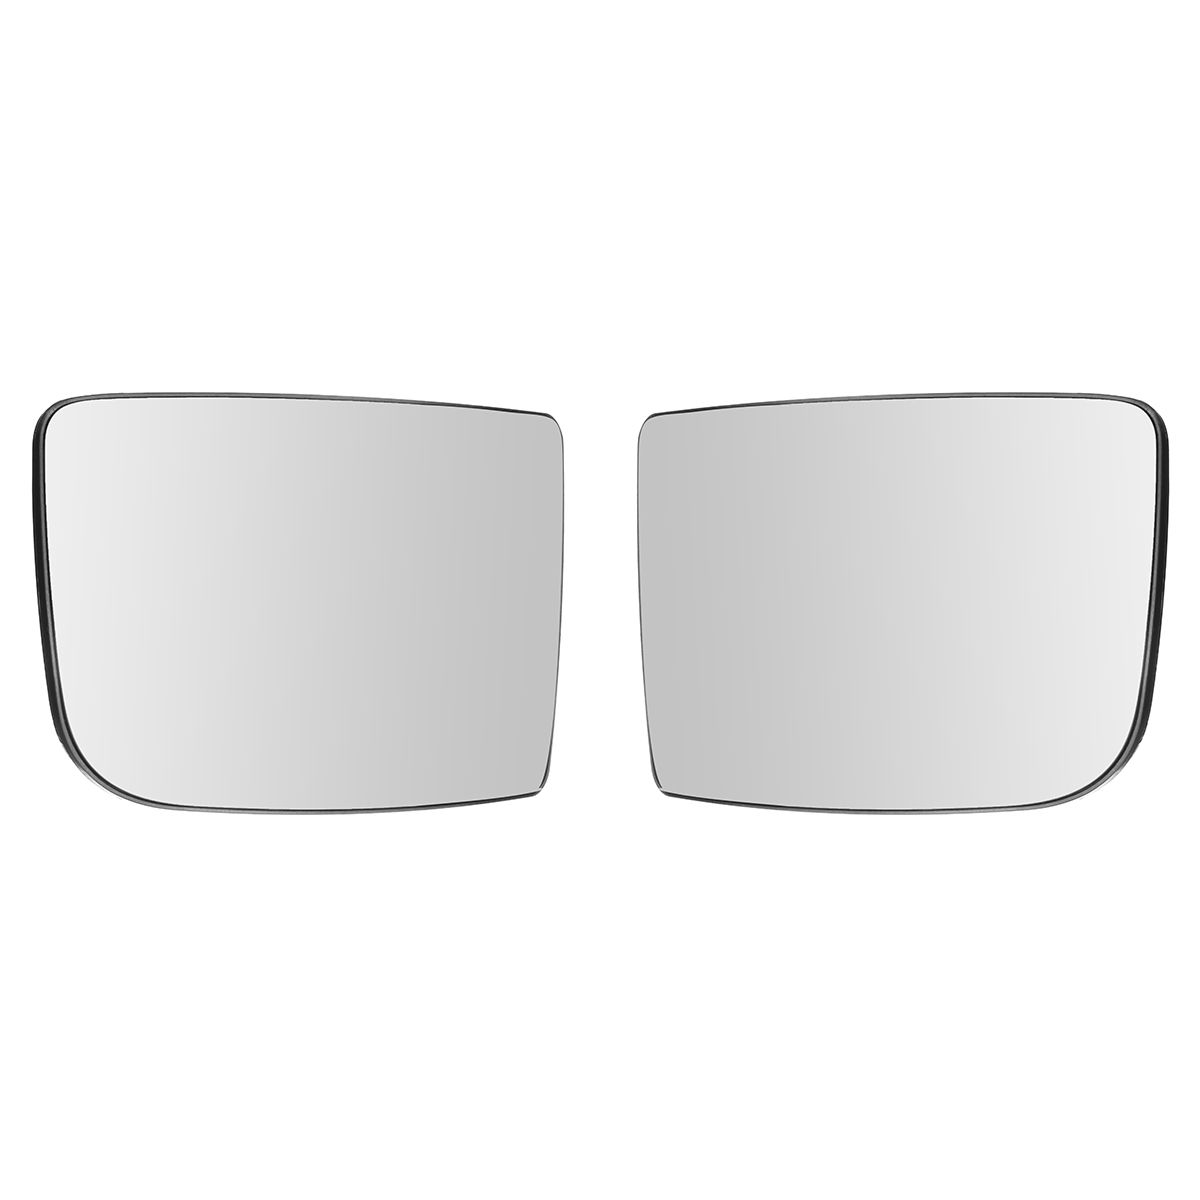 Wing-Reaview-Car-Mirror-Glass-Push-on-Left-Right-Side-For-Mercedes-Sprinter-06-onon-1401190